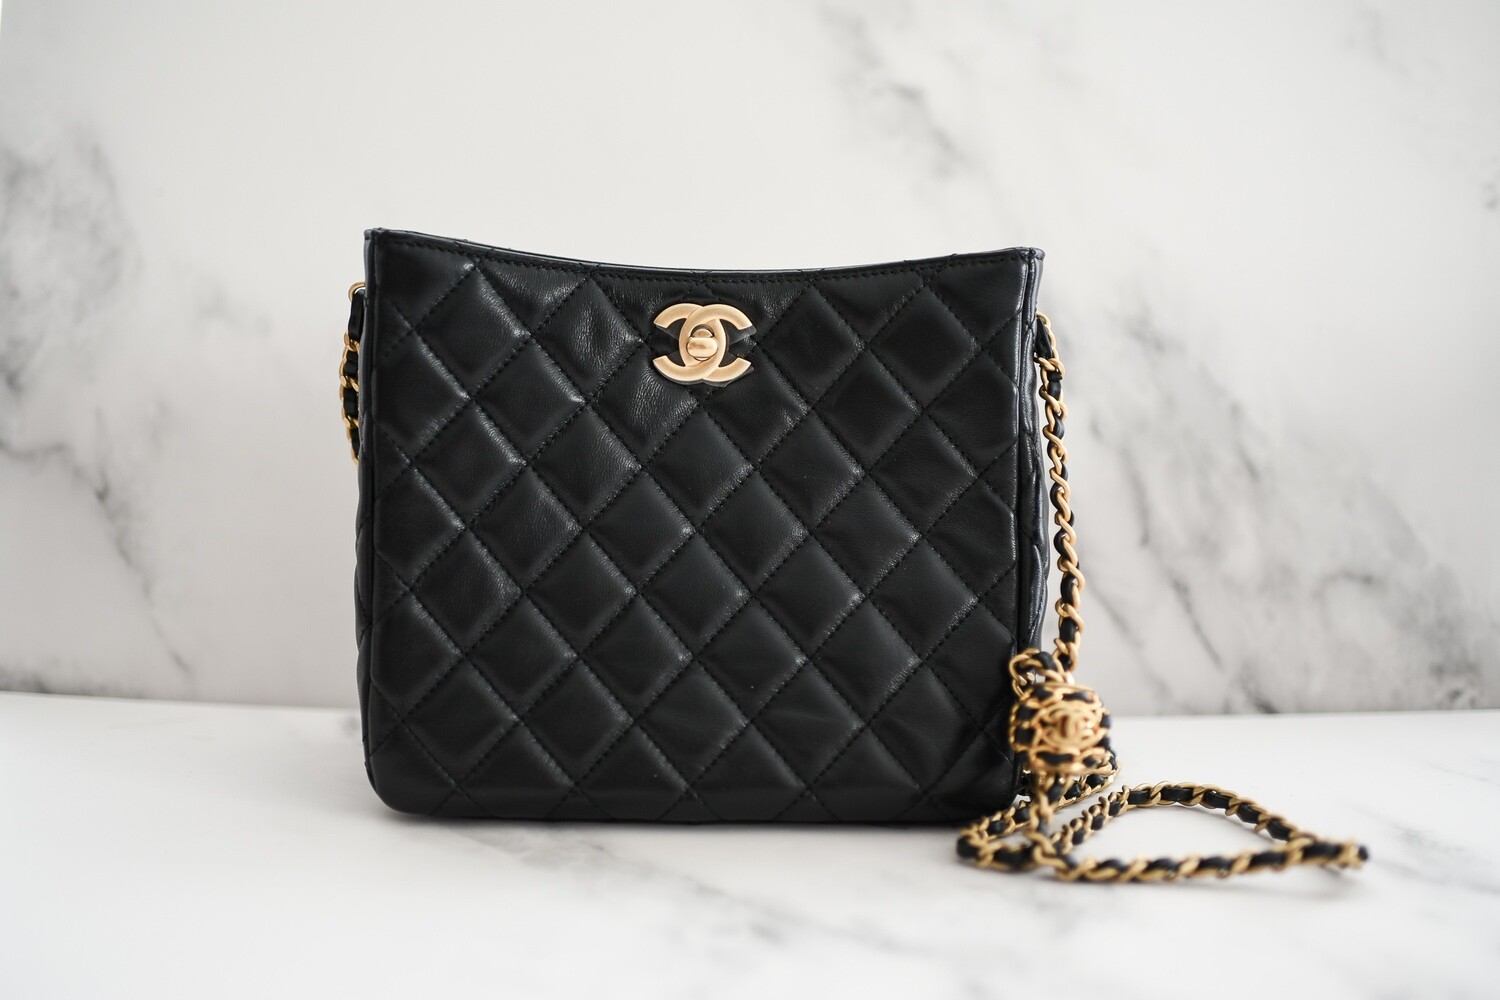 USED Chanel Black Lambskin Quilted Crush on Chains Hobo Bag AUTHENTIC